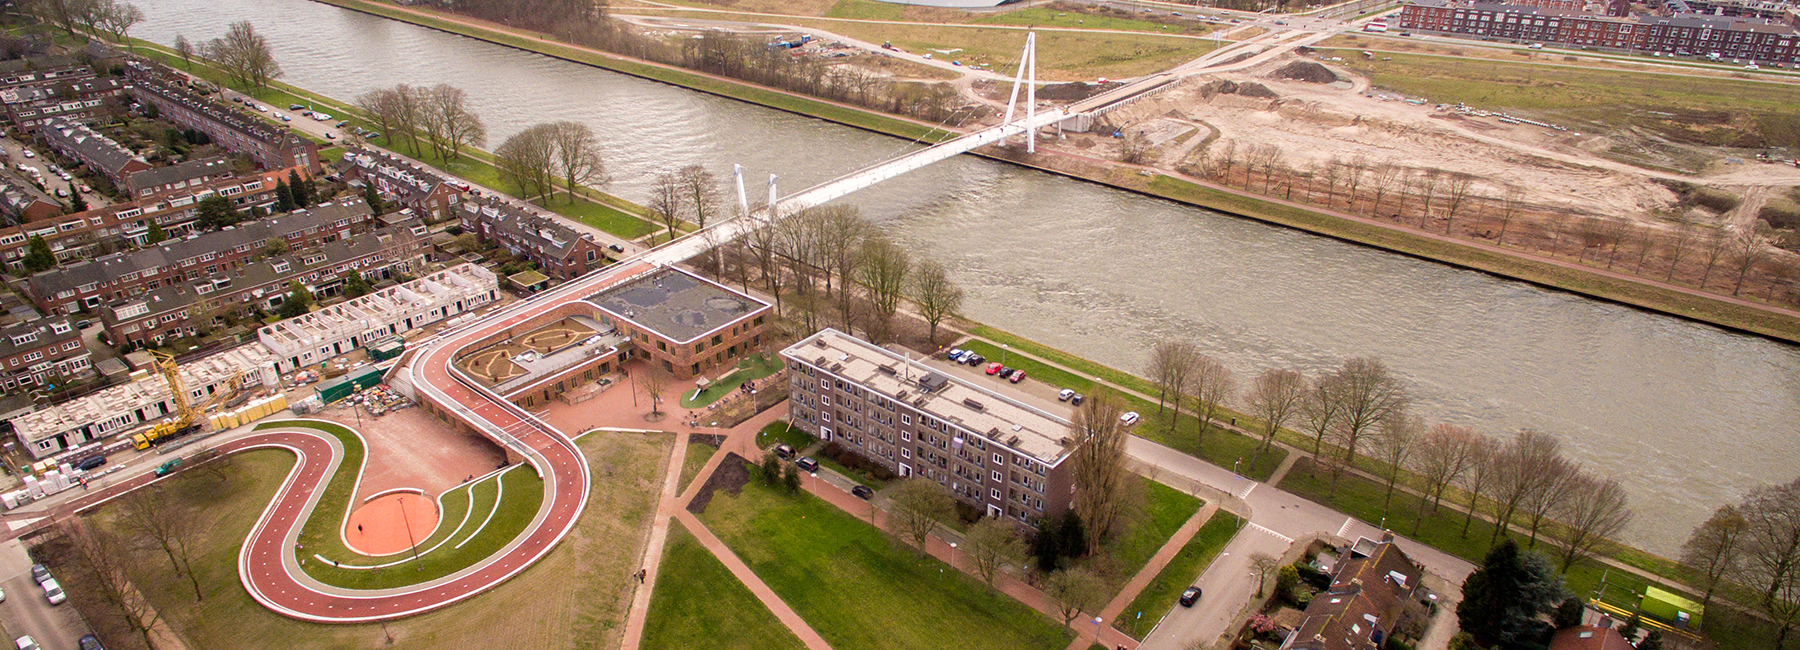 NEXT architects' utrecht bridge allows cyclists to bike over the roof of school